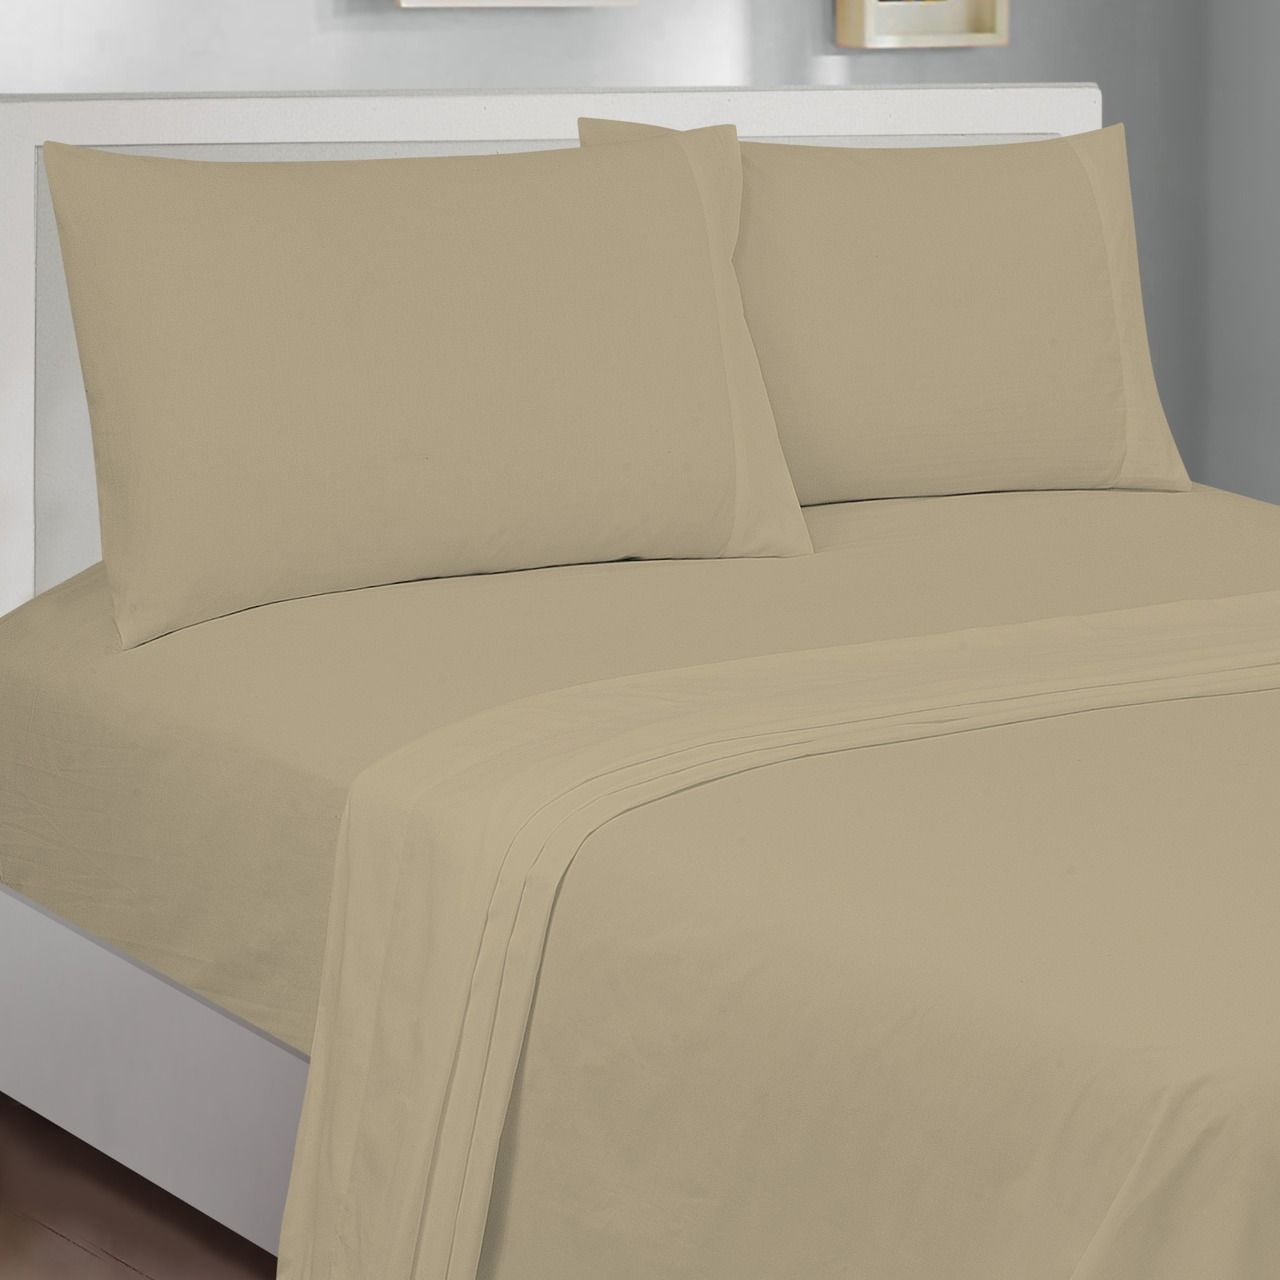 Mainstays 300TC Cotton Rich Percale Easy Care Bed Sheet Set,Pillow Cases,Queen(2 Count),BrownStone